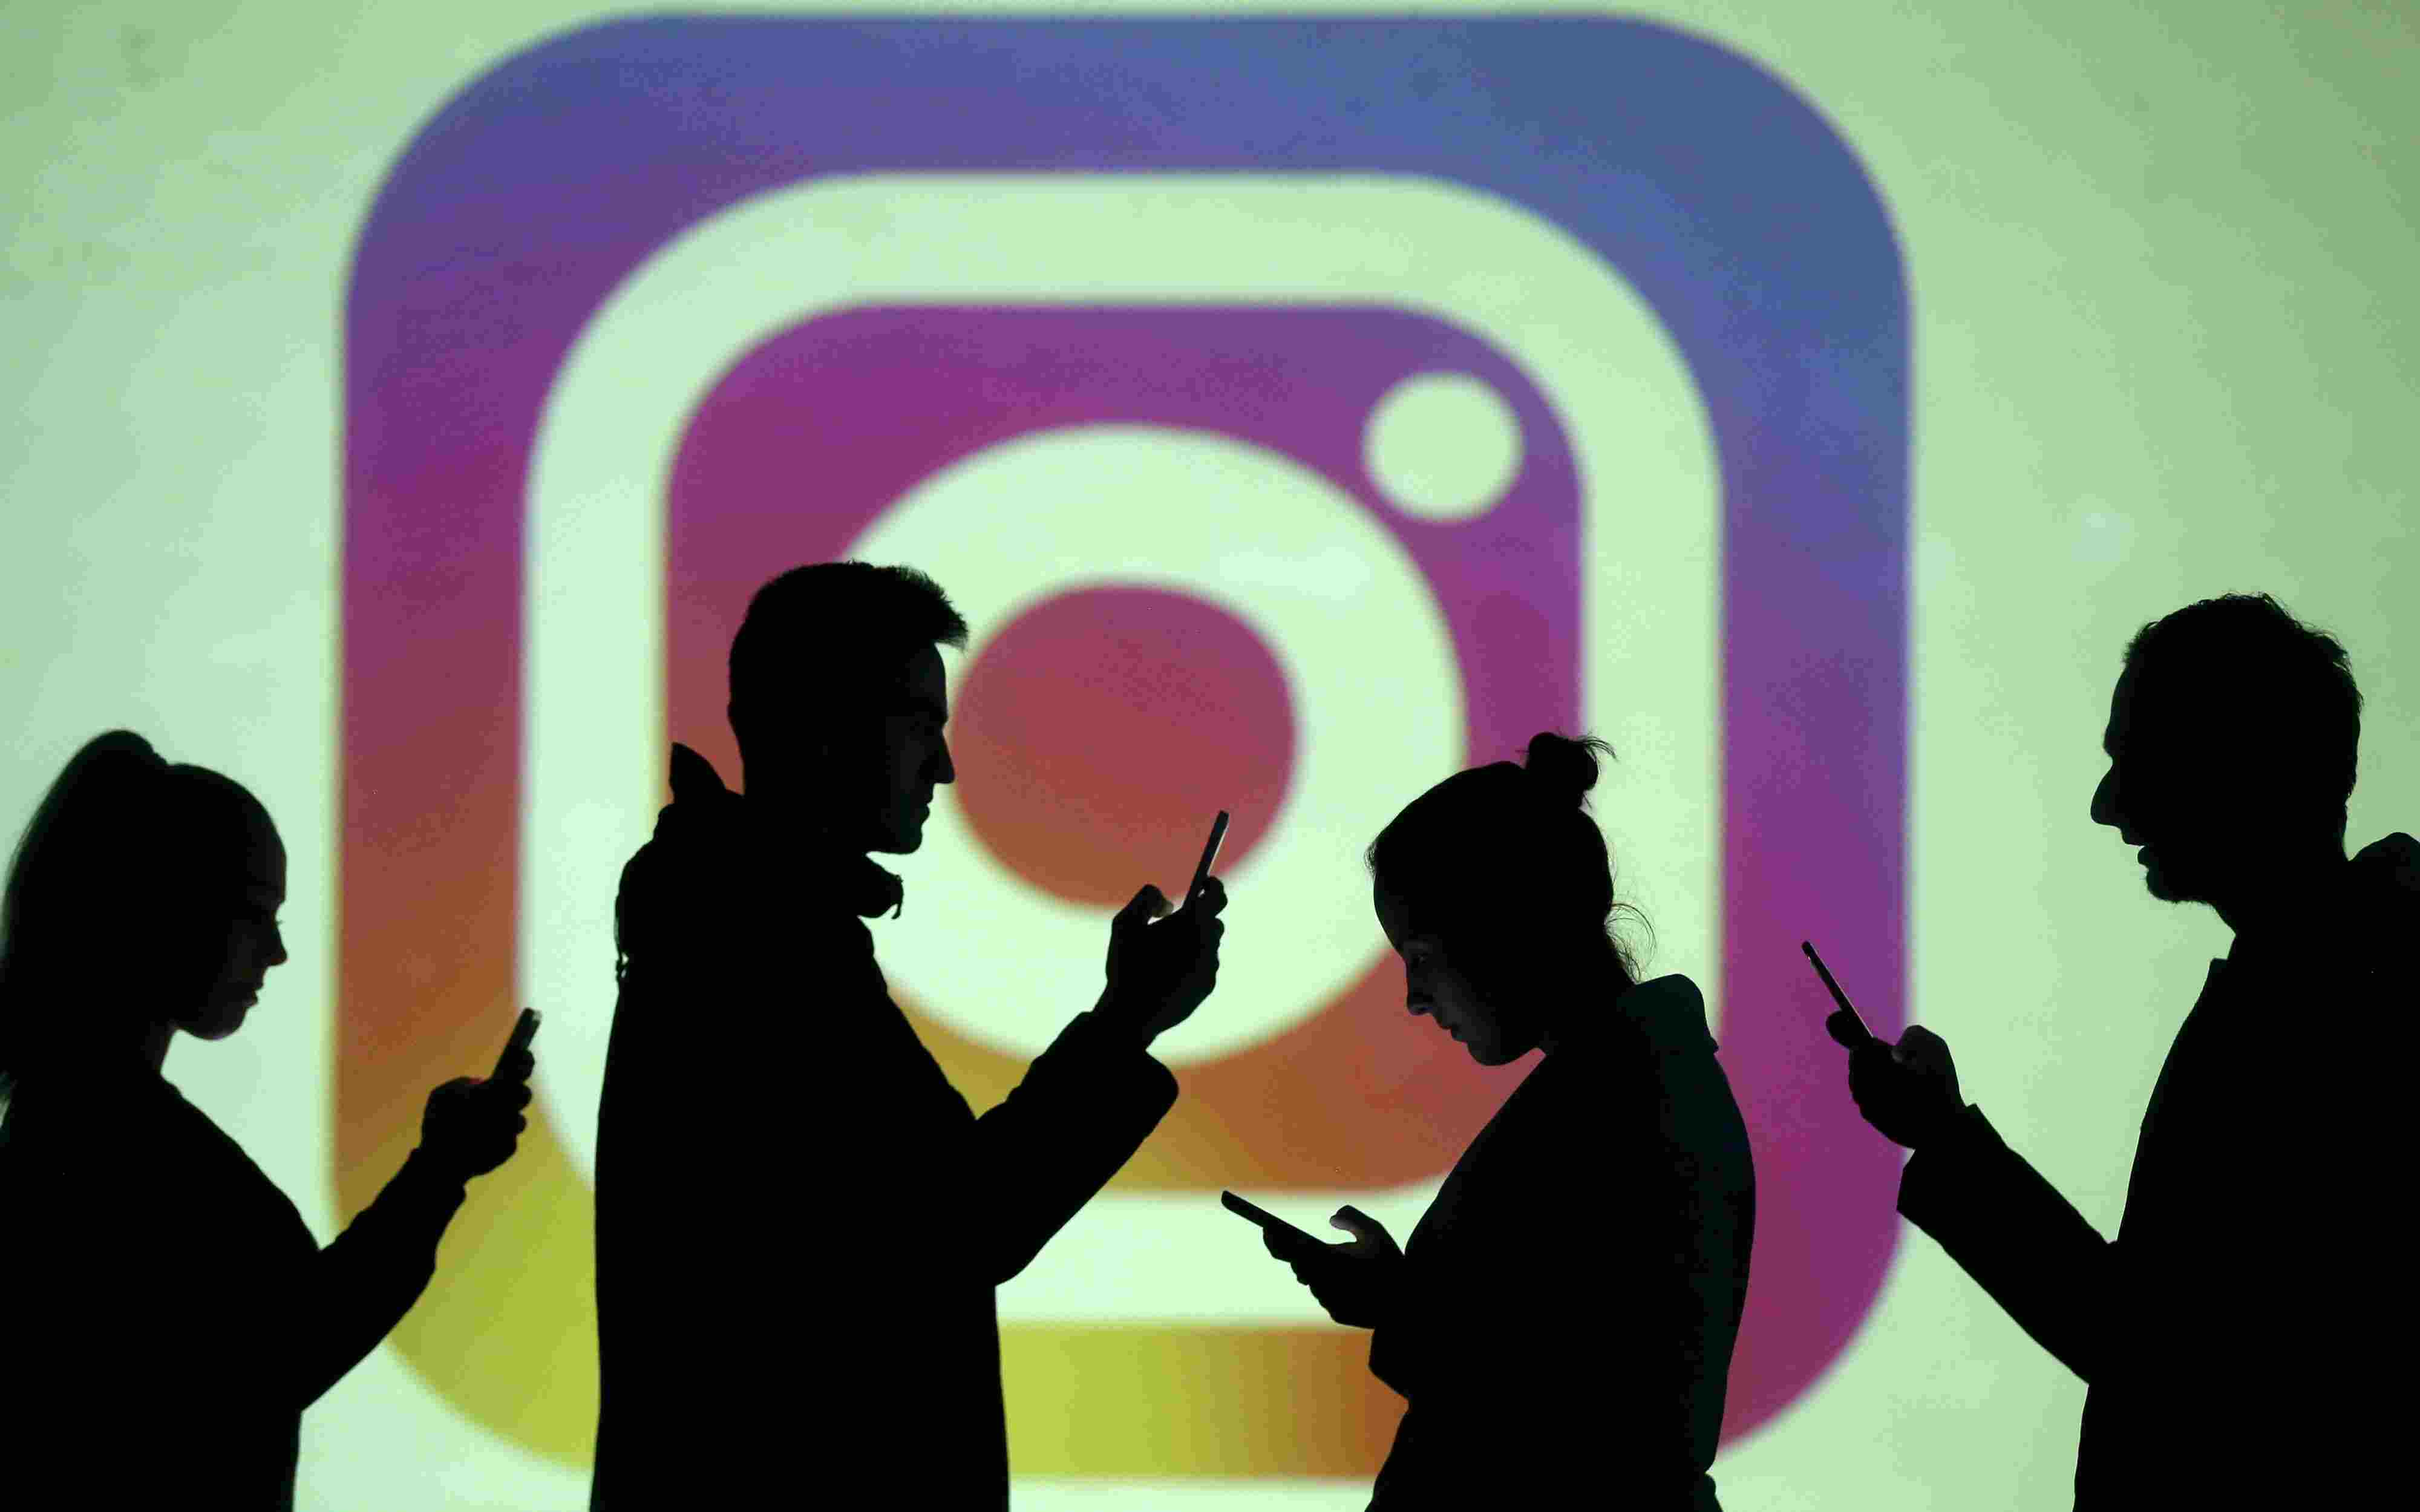 Facebook Delays Instagram App for Users 13 and Younger